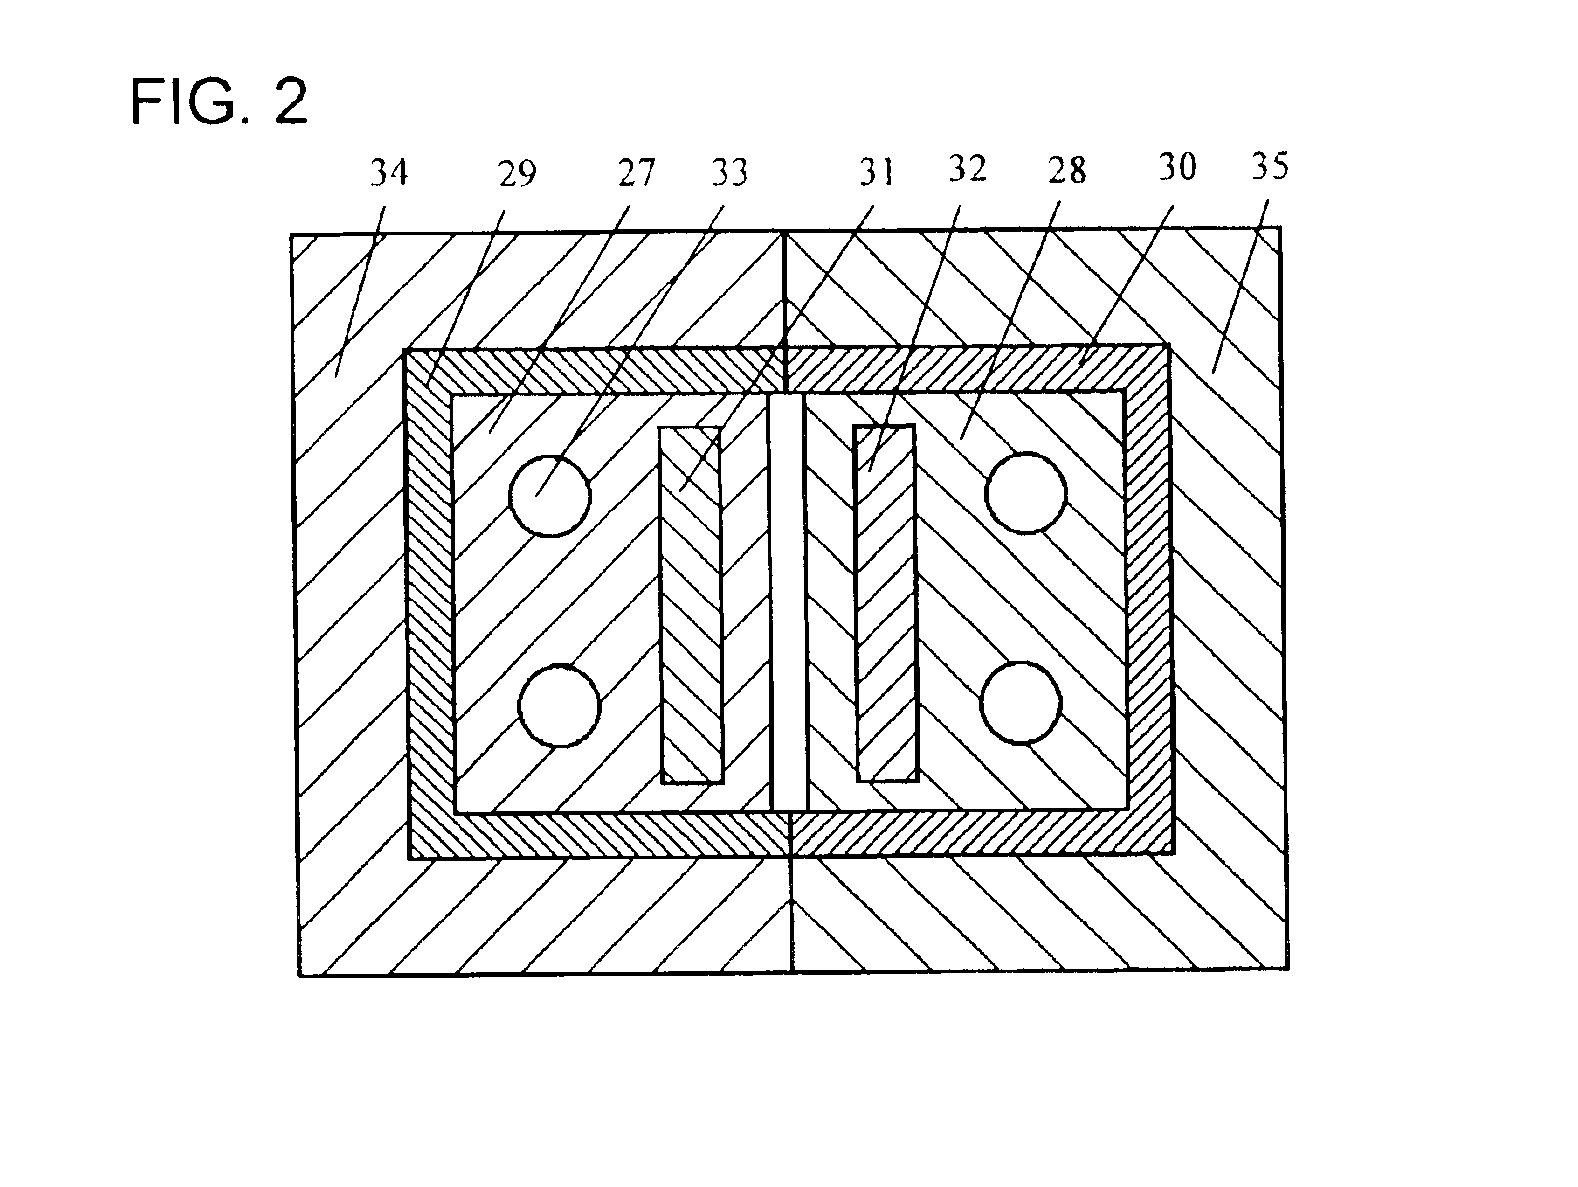 Method for rapid mold heating and cooling